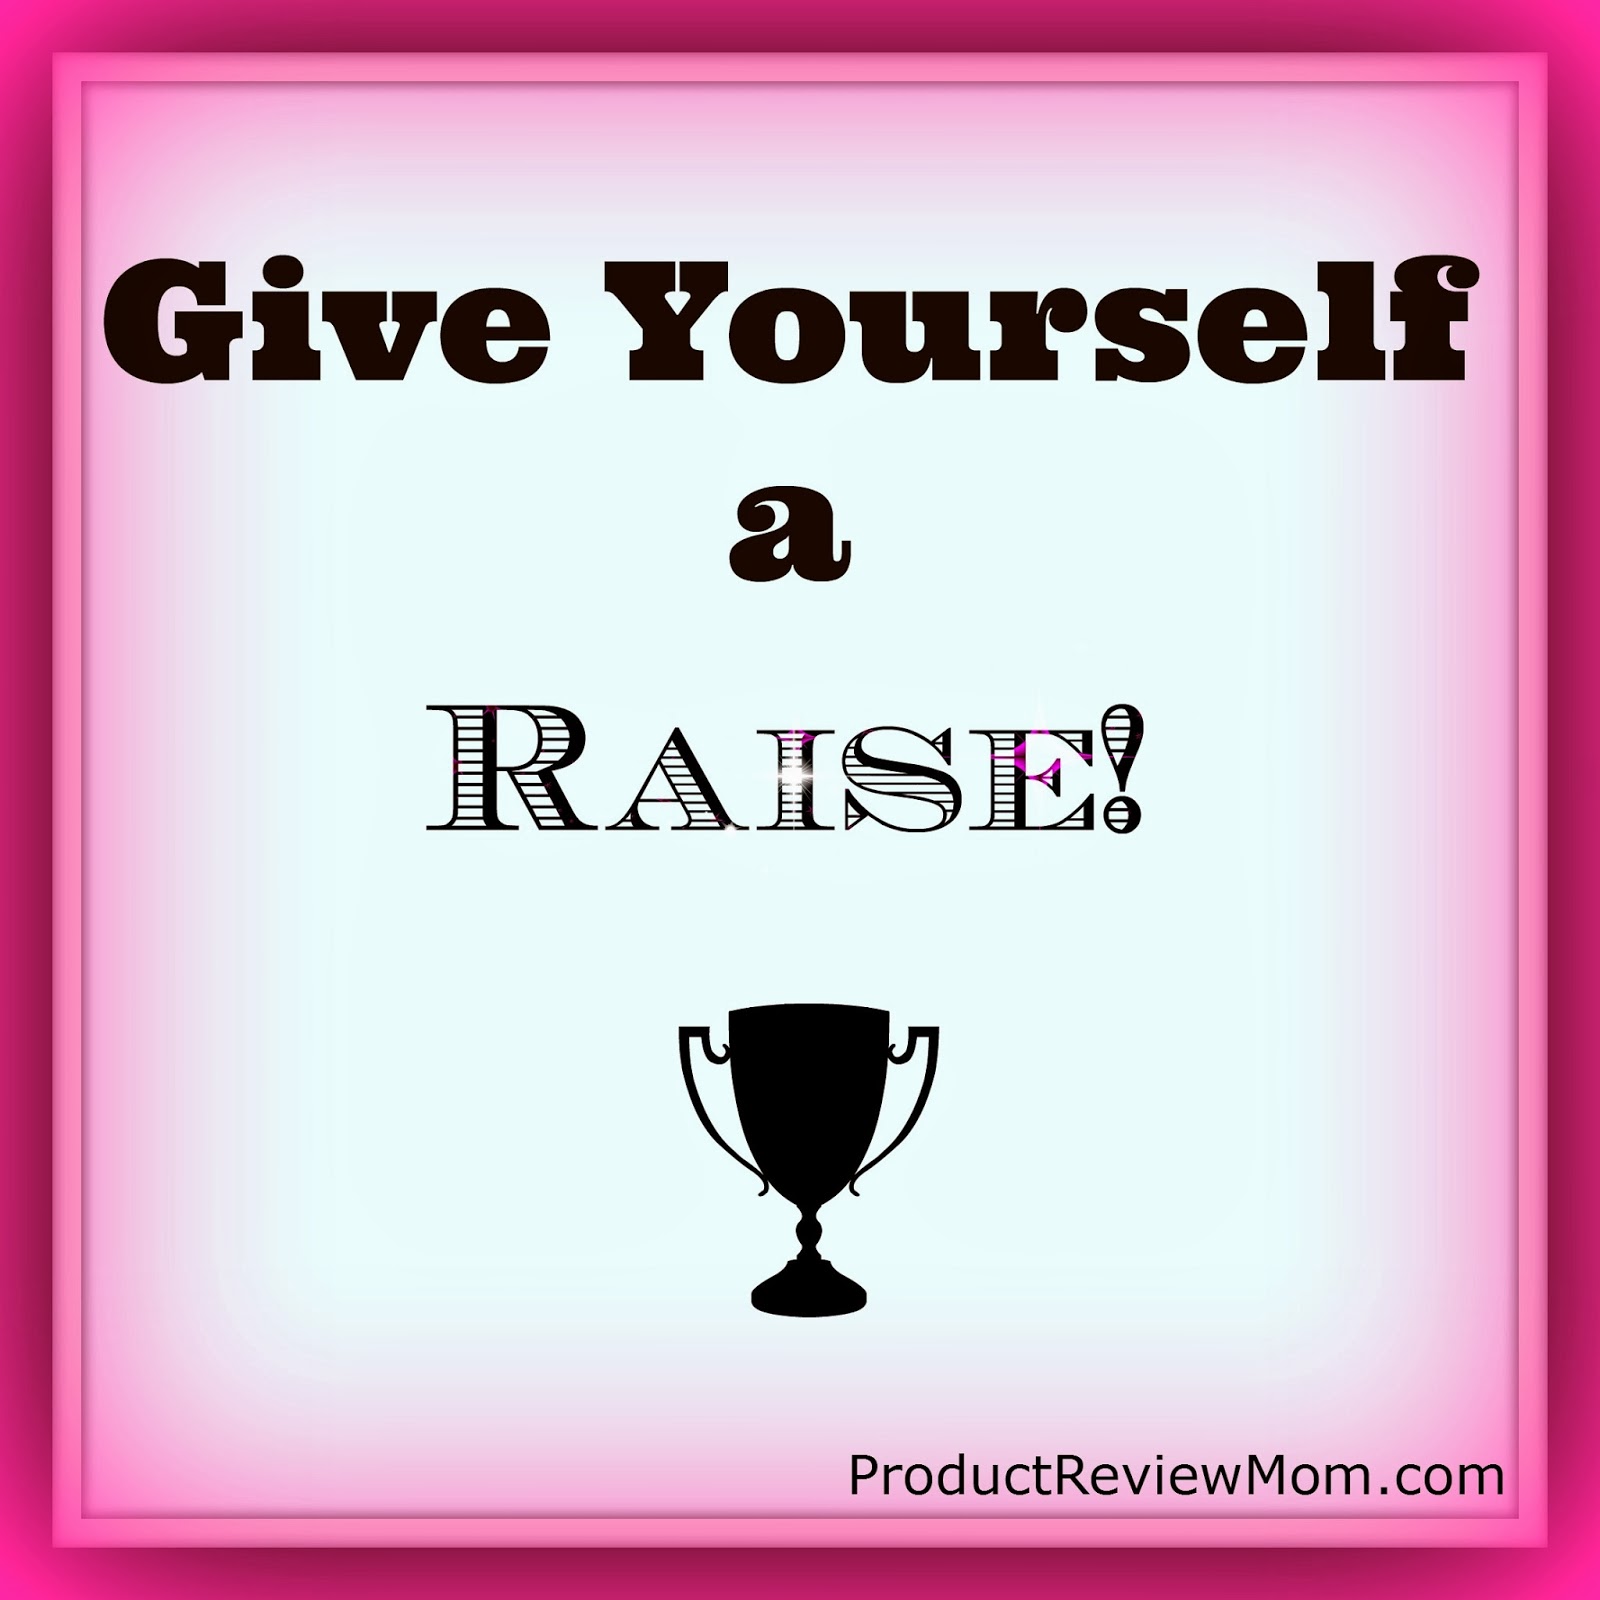 Give Yourself a Raise